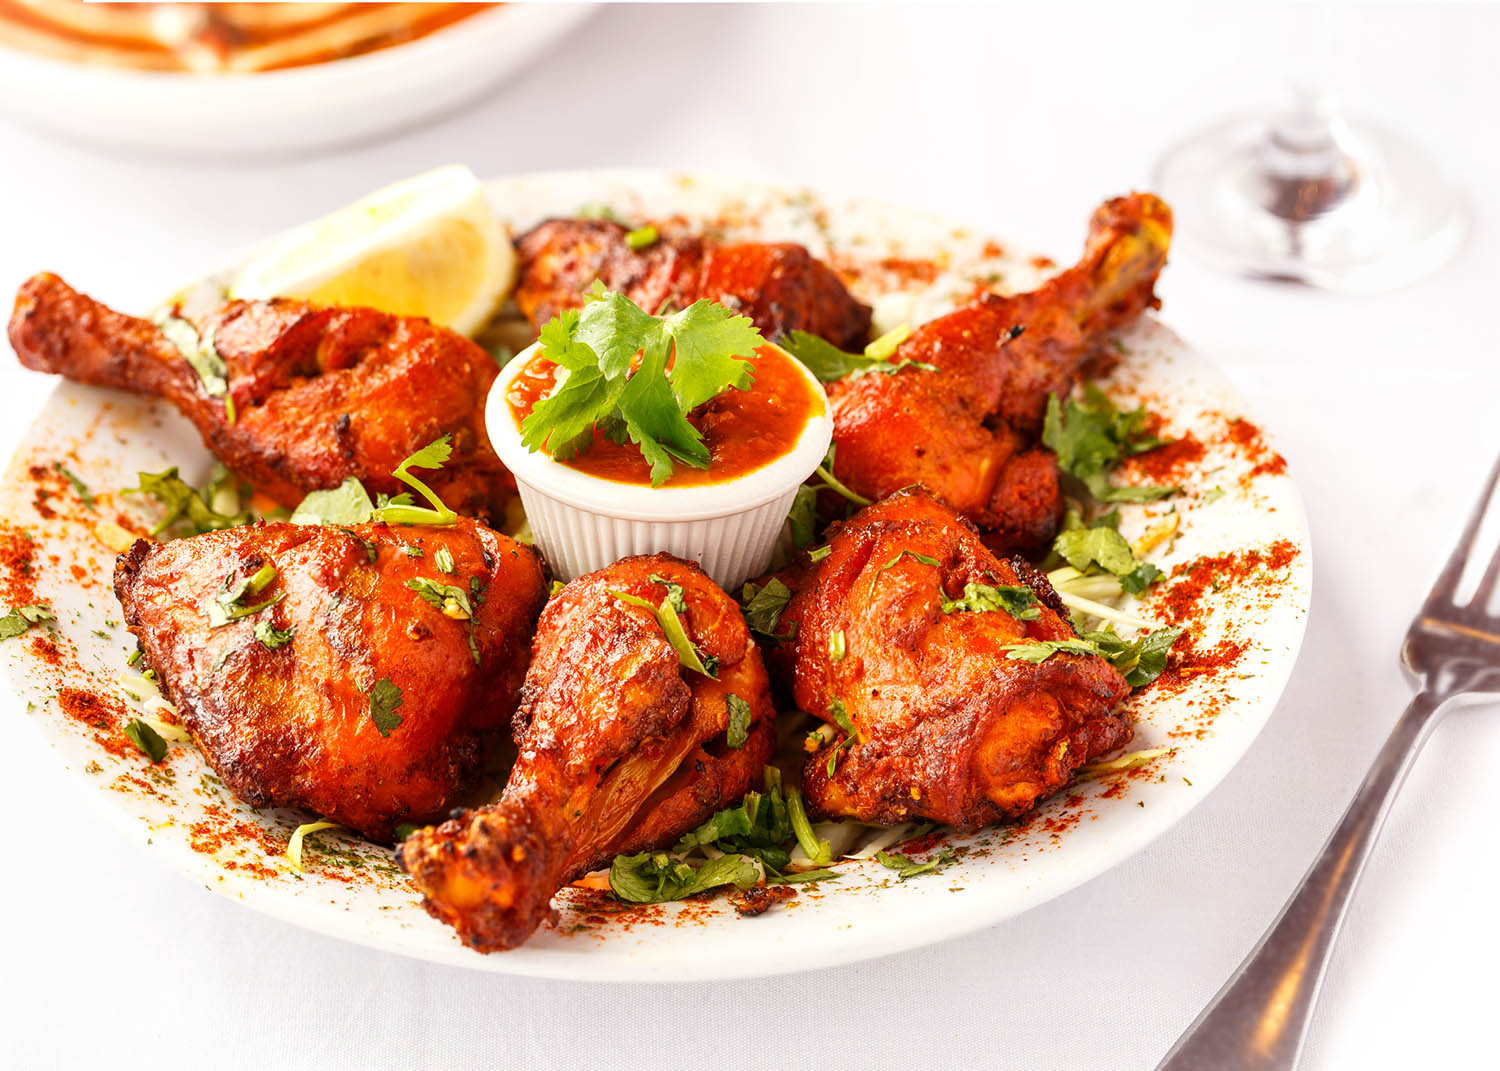 Indian Food Entree of Tandoori Chicken with Herbs on top